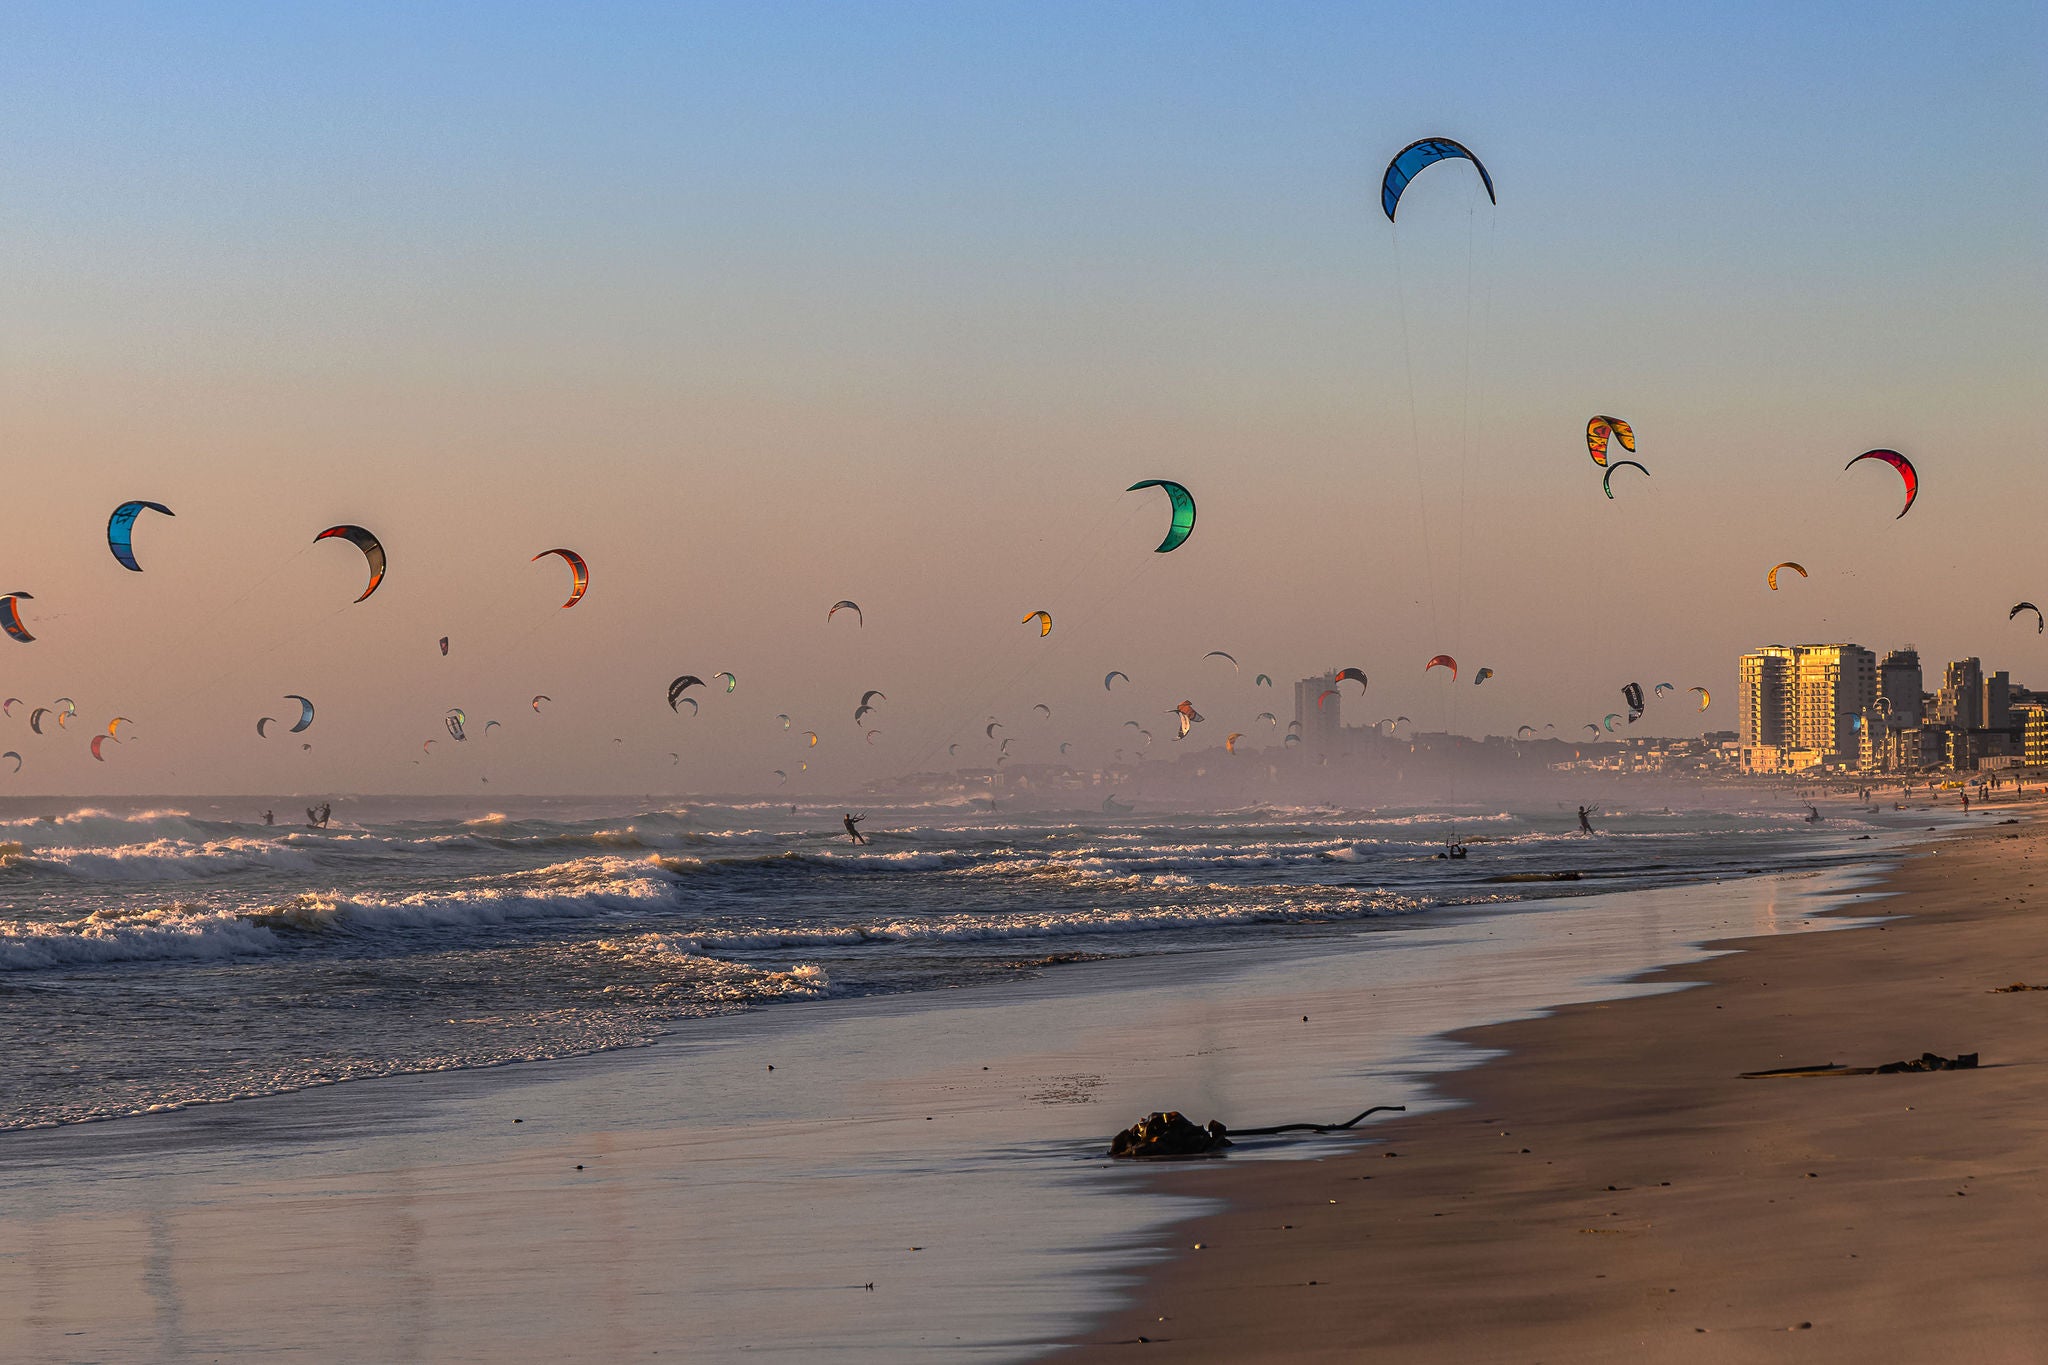 Group of people kite surfing seen from the beach